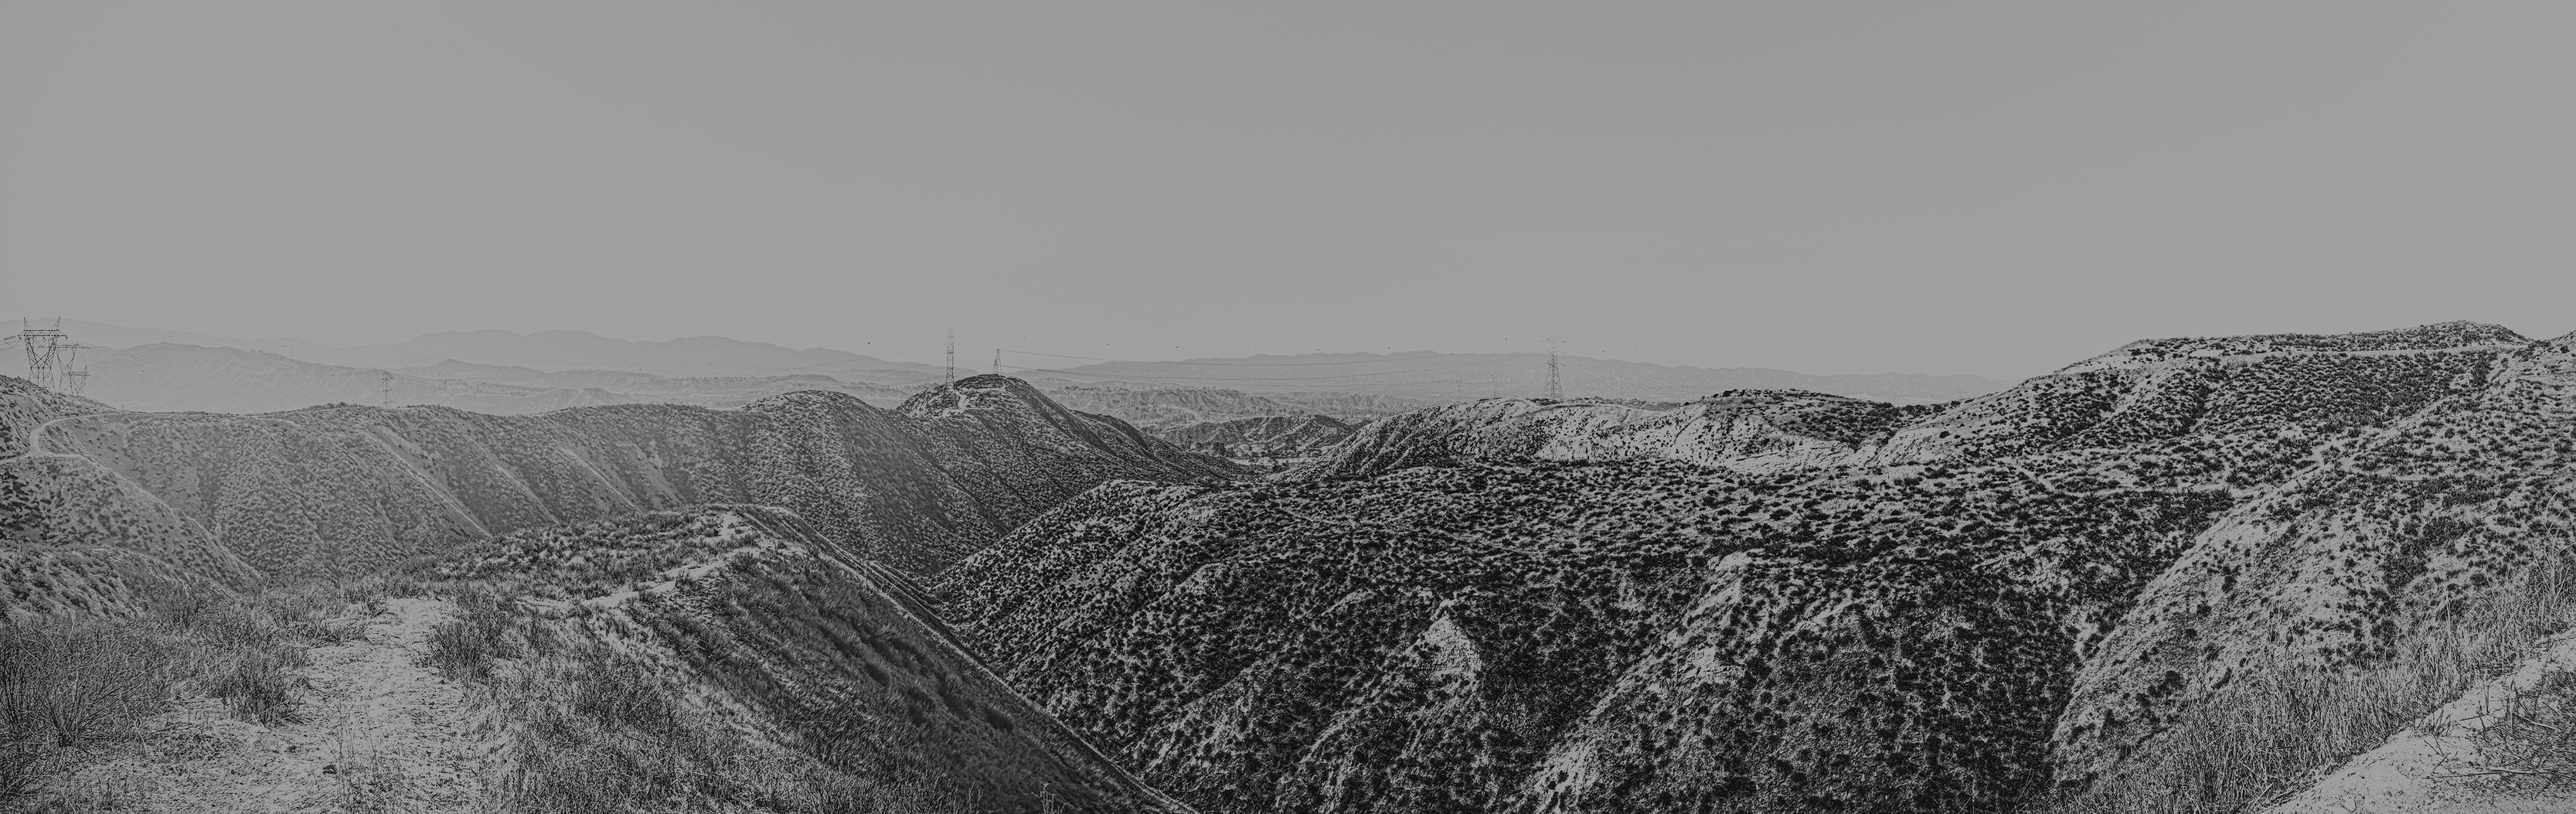 Haskell Canyon